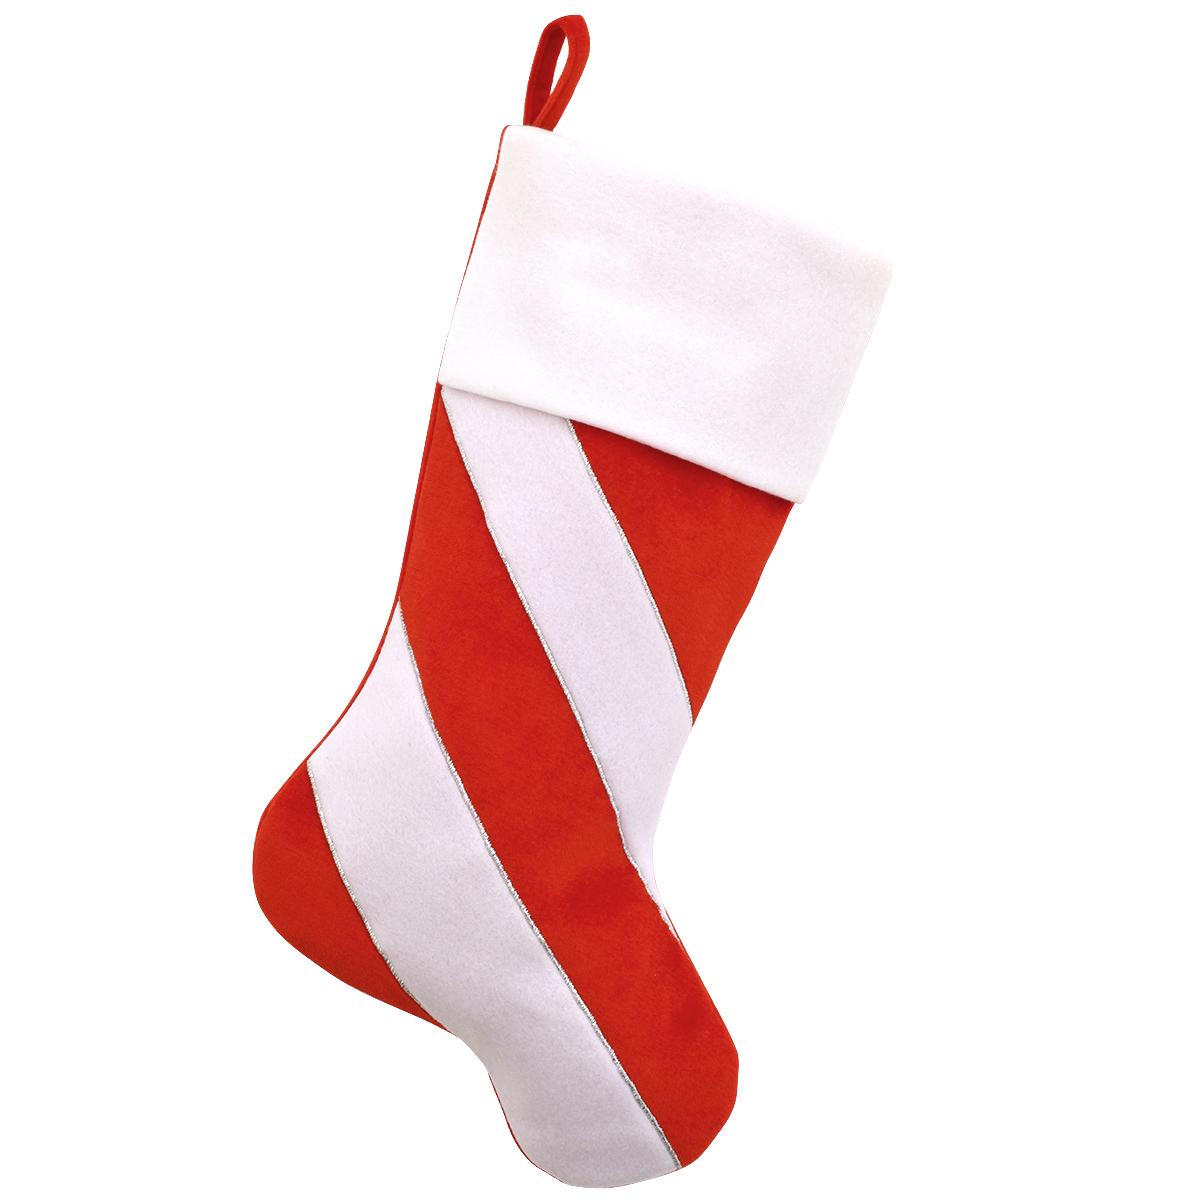 Alternate image showing red and white candy cane striped velvet stocking with white cuff without personalization.